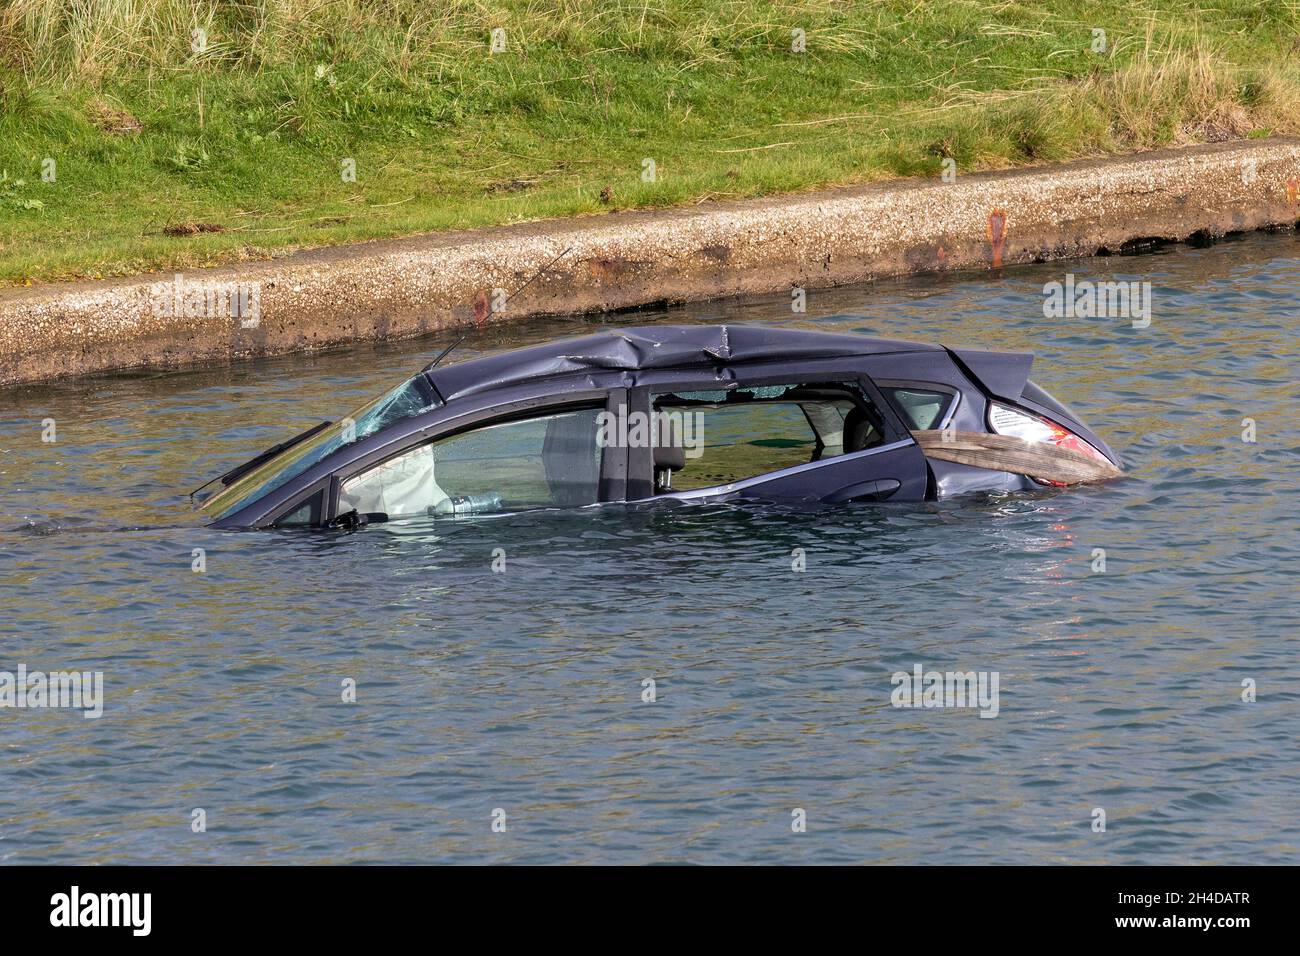 Souithport, Merseyside. UK Weather 02 Nov 2021. Bad weather overnight as  Ford Fiesta with three female passengers crashed through metal barrier and  fell into Marine lake. Three passengers were unhurt having made